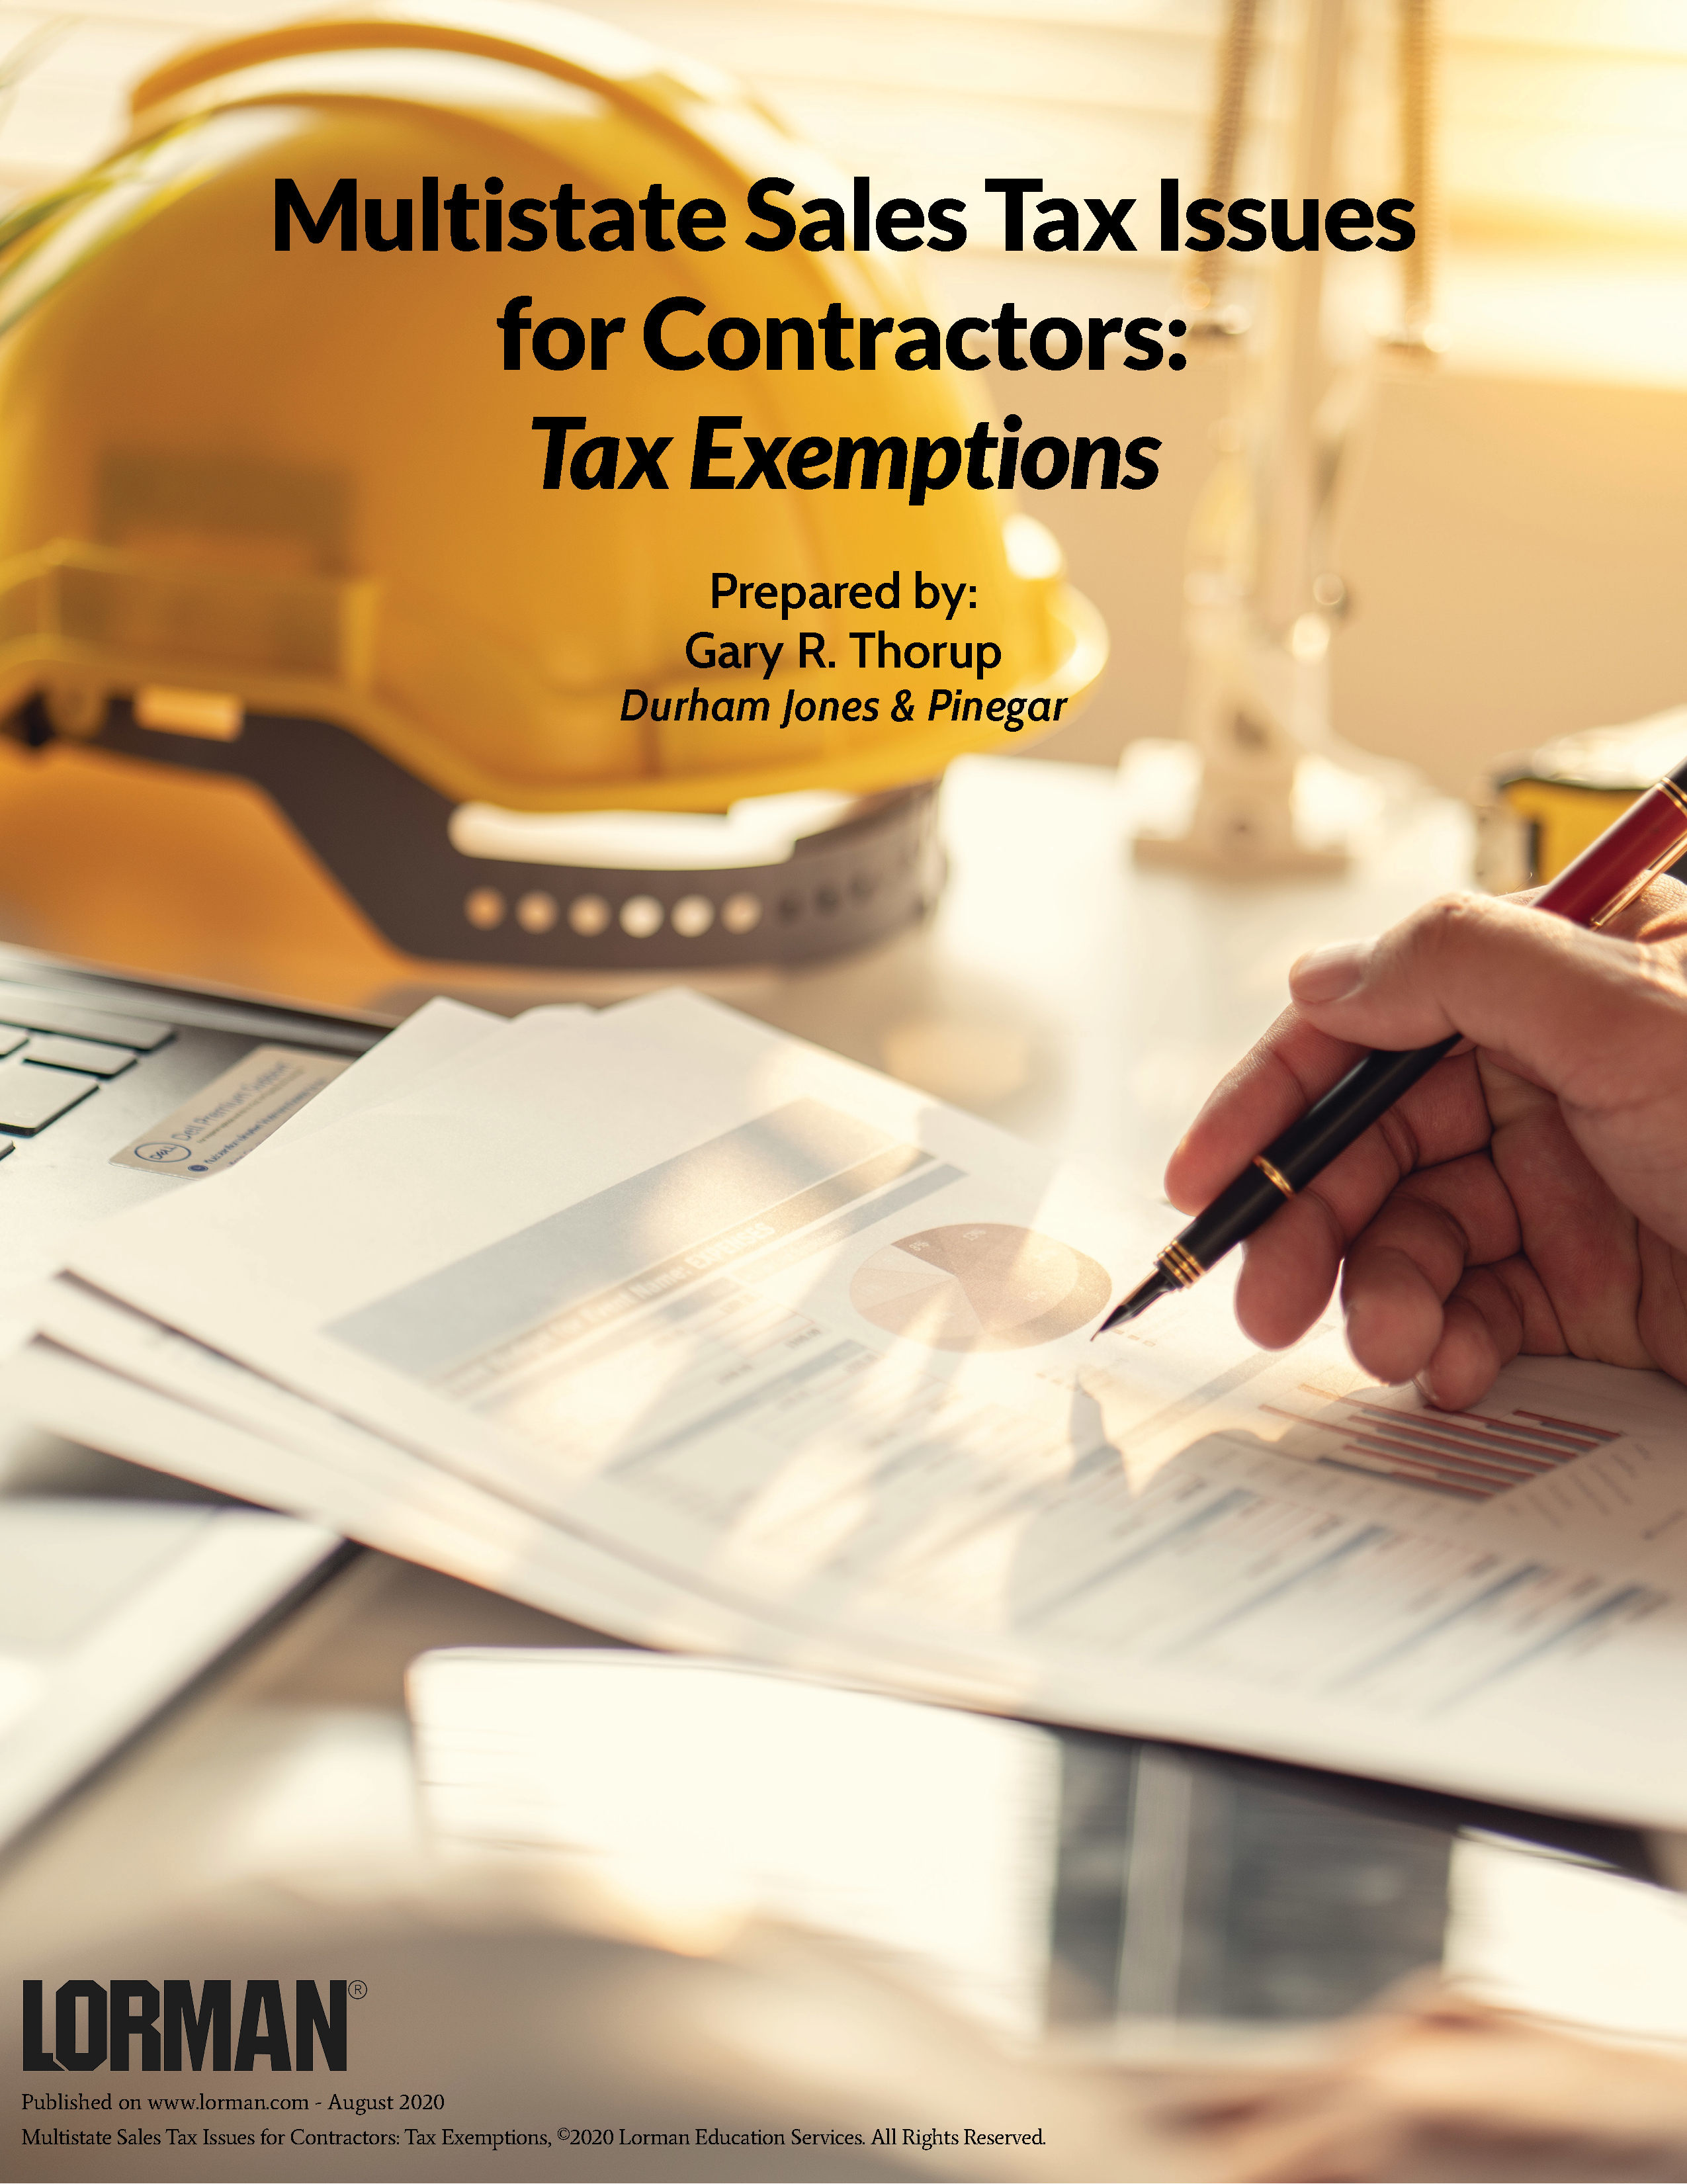 Multistate Sales Tax Issues for Contractors - Tax Exemptions